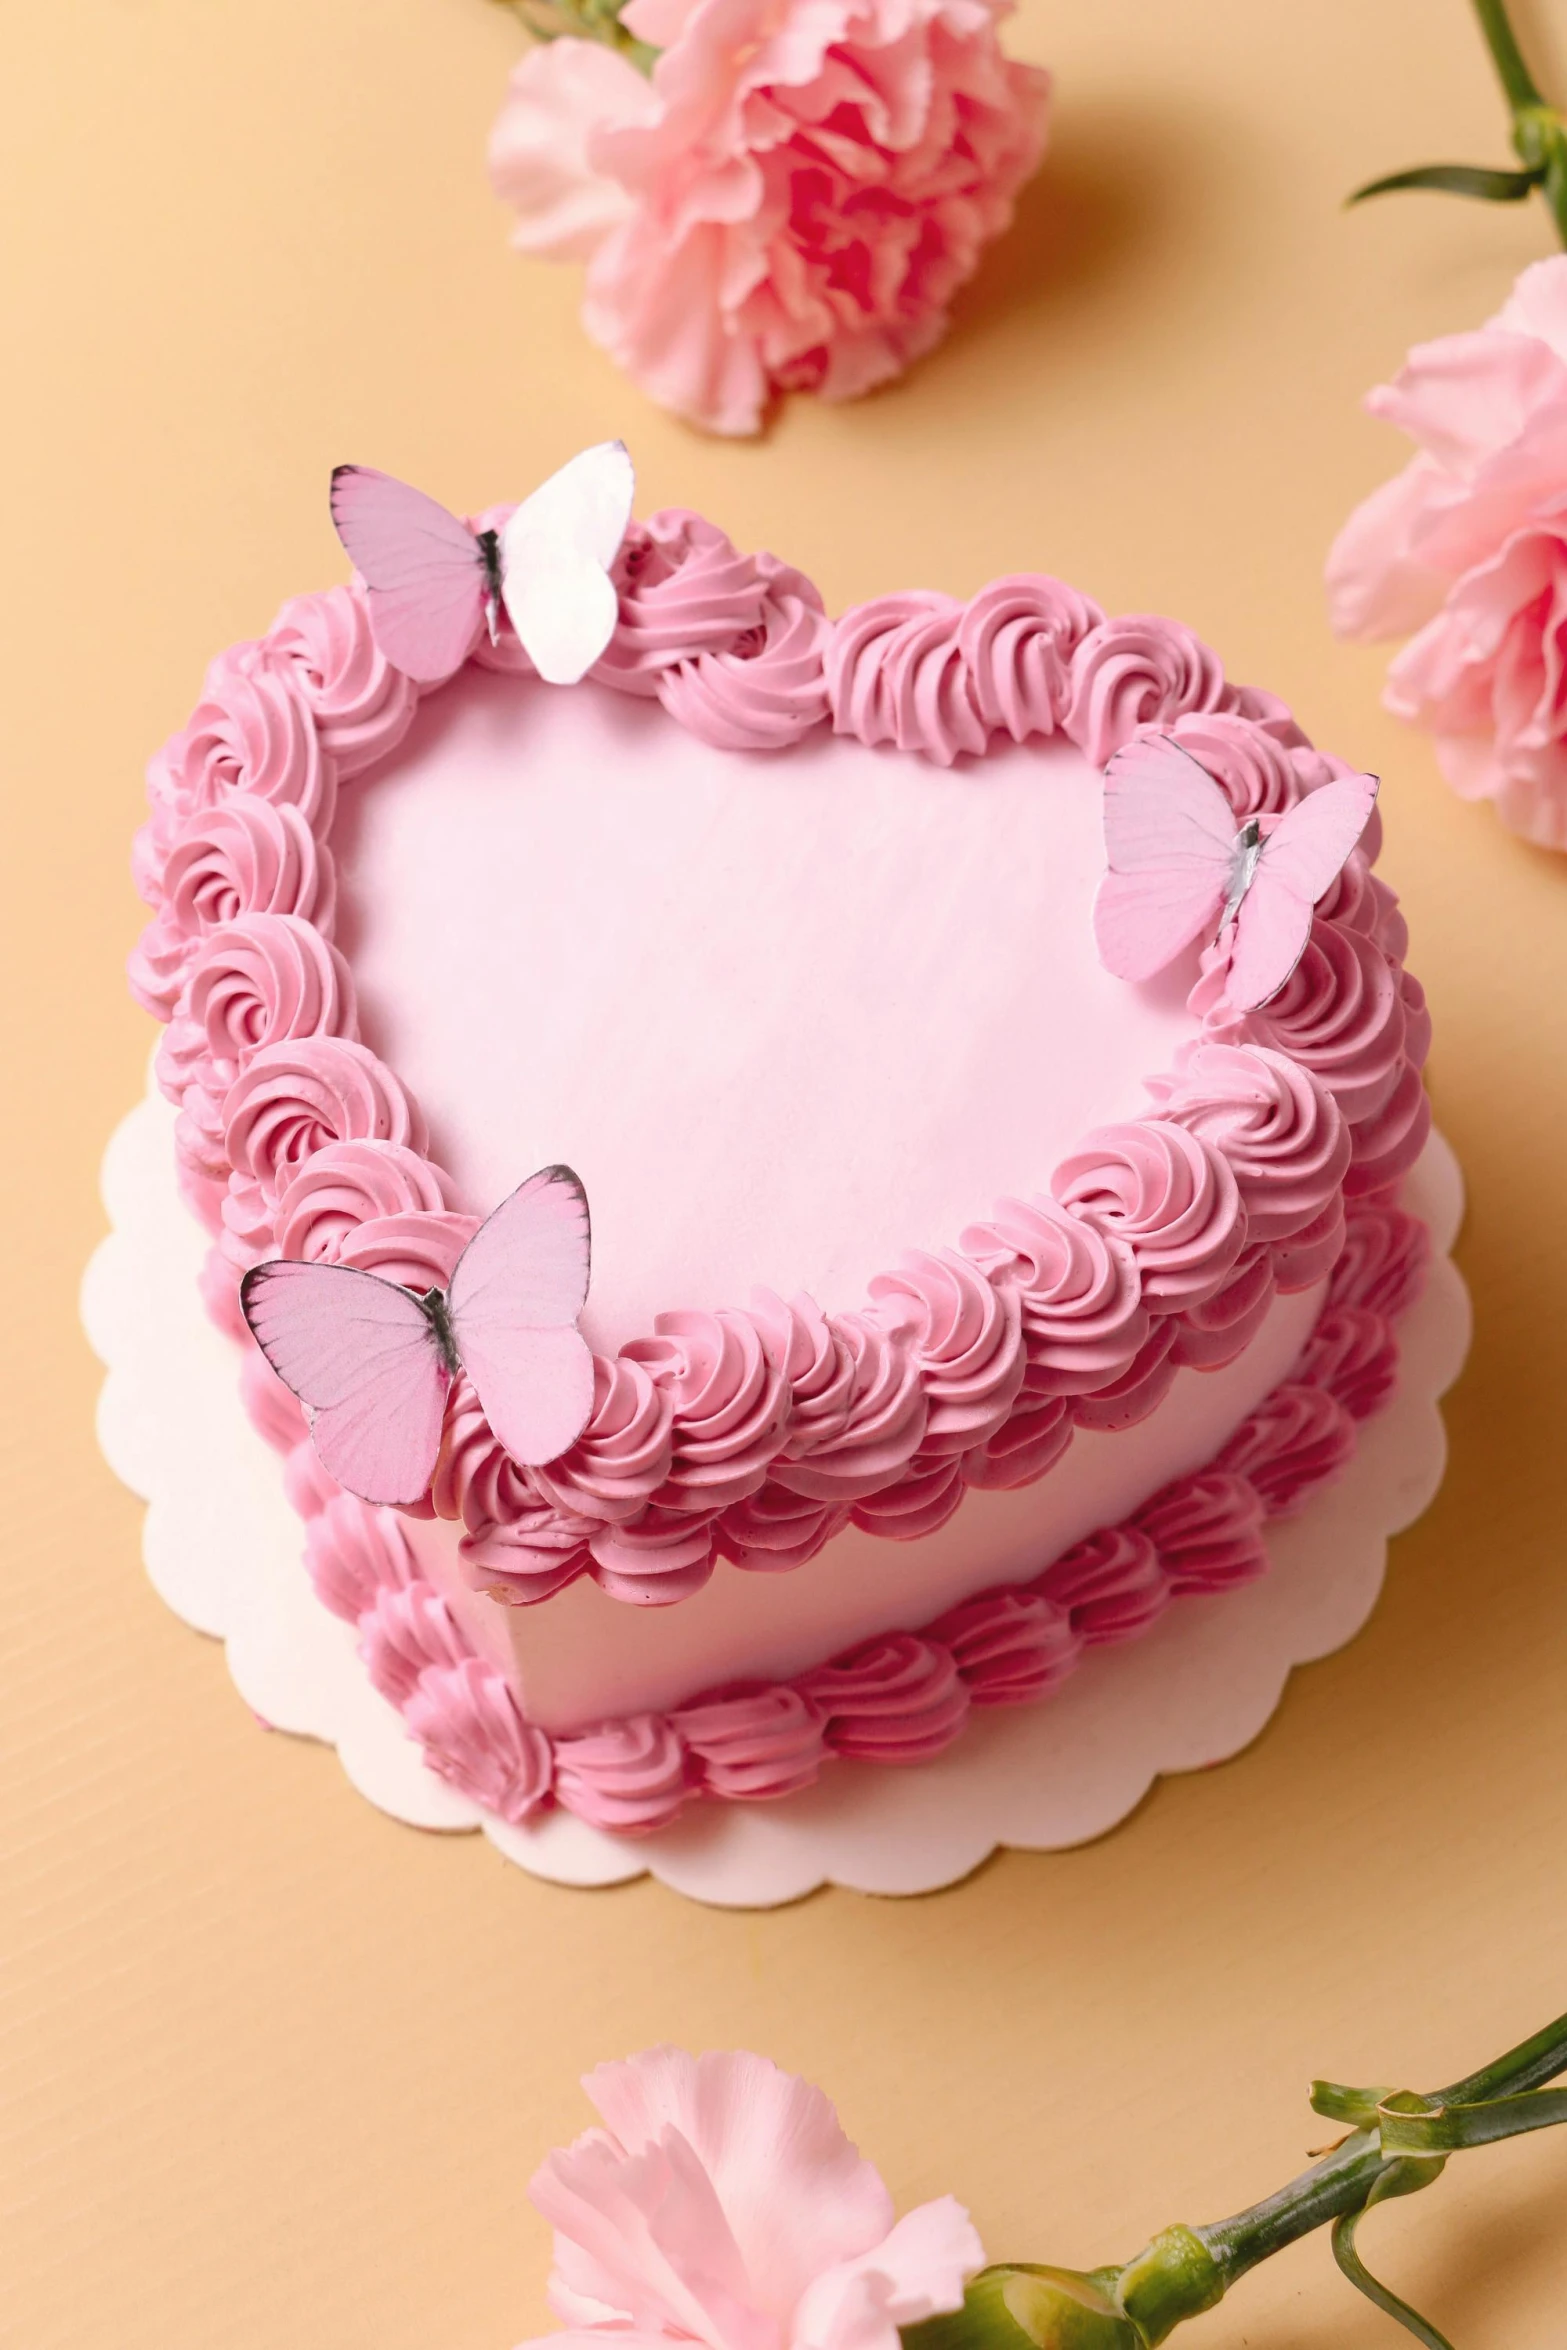 a pink heart shaped cake sits on a table with flowers